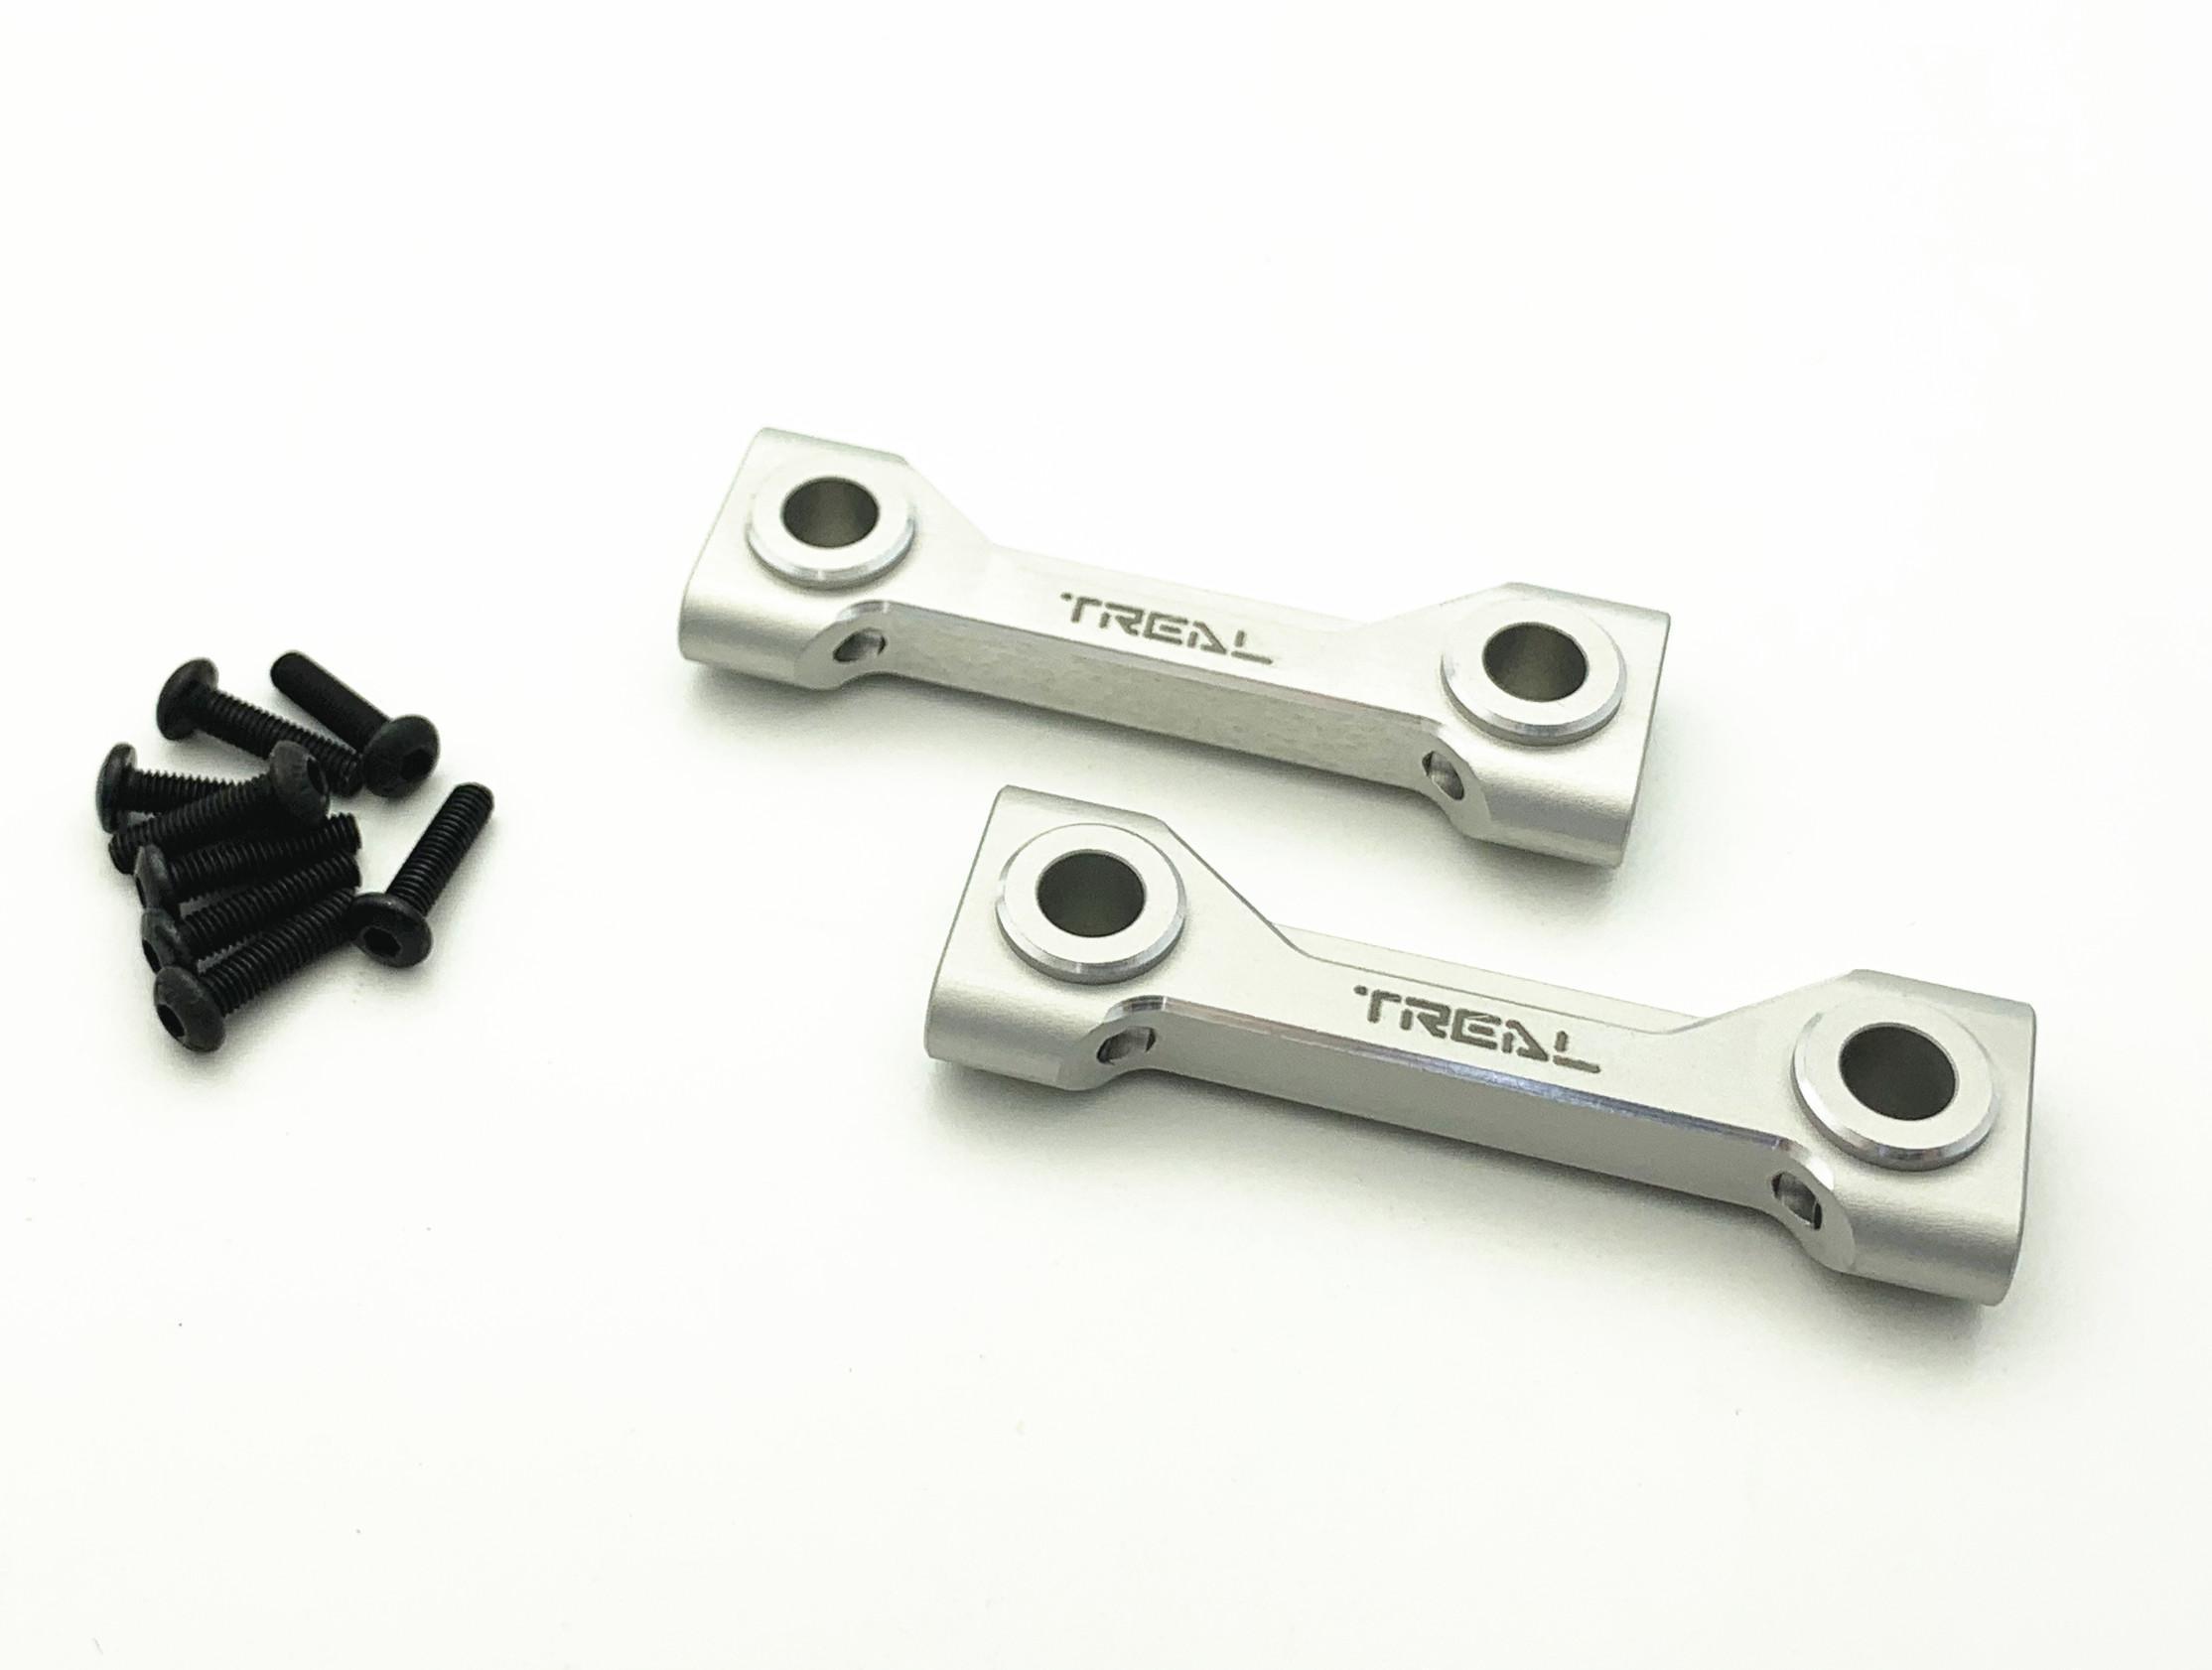 Treal Aluminum 7075 Front and Rear Cross Brace Set Chassis for LMT (Silver)